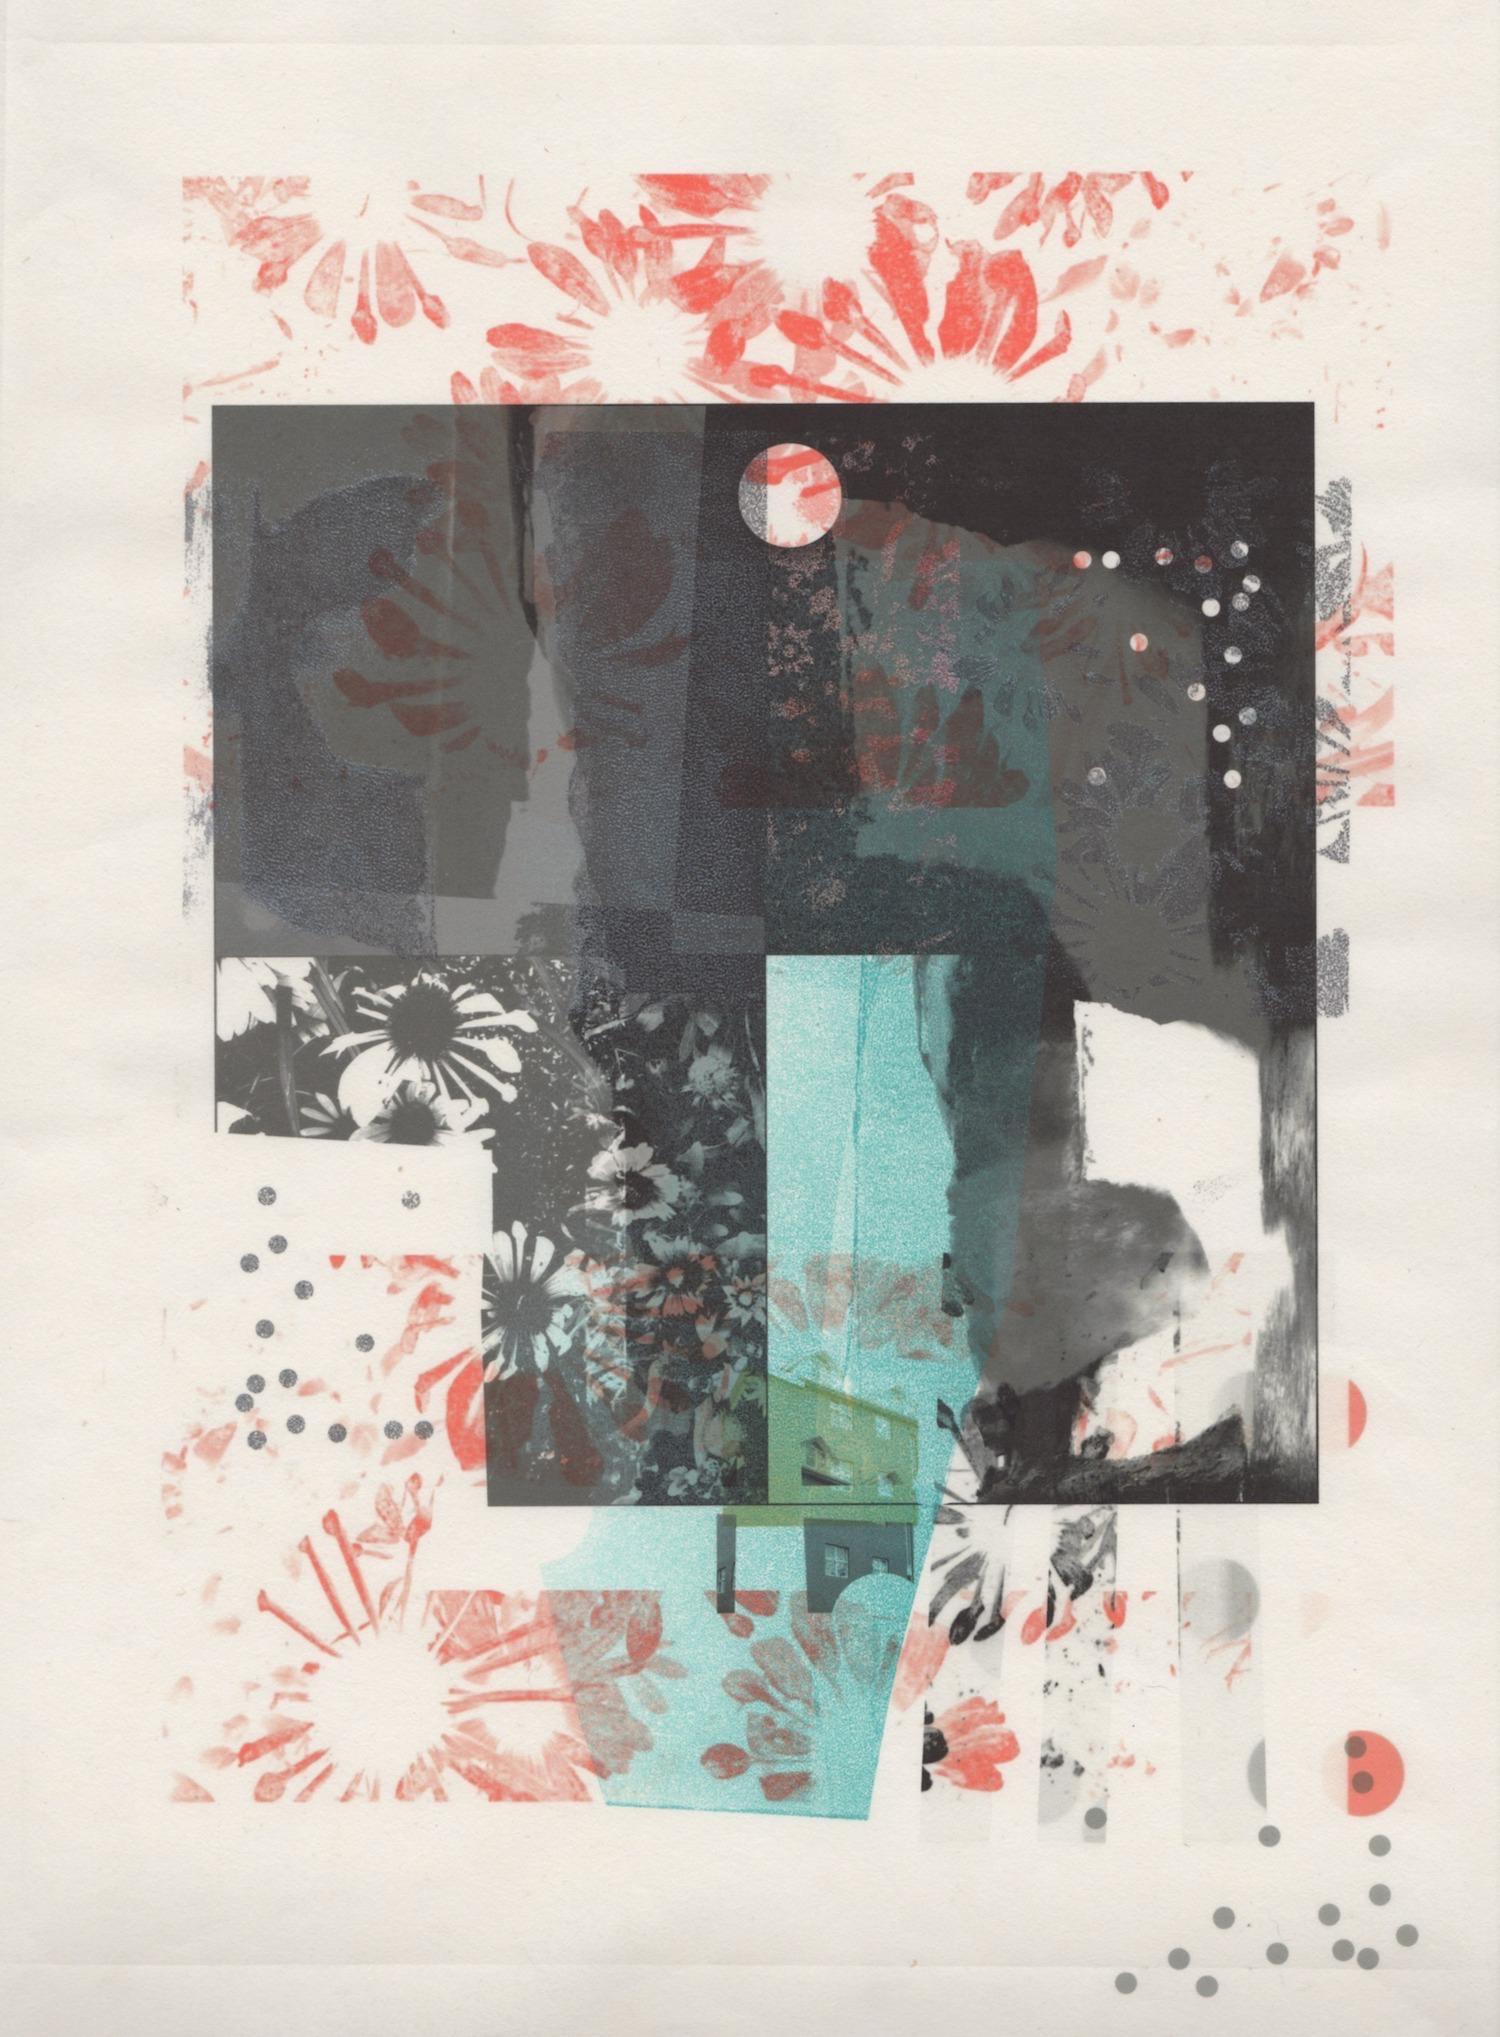 Patty deGrandpre Abstract Print - "If You Cut Through Their Yard, You Can See the Small Green House", monoprint 